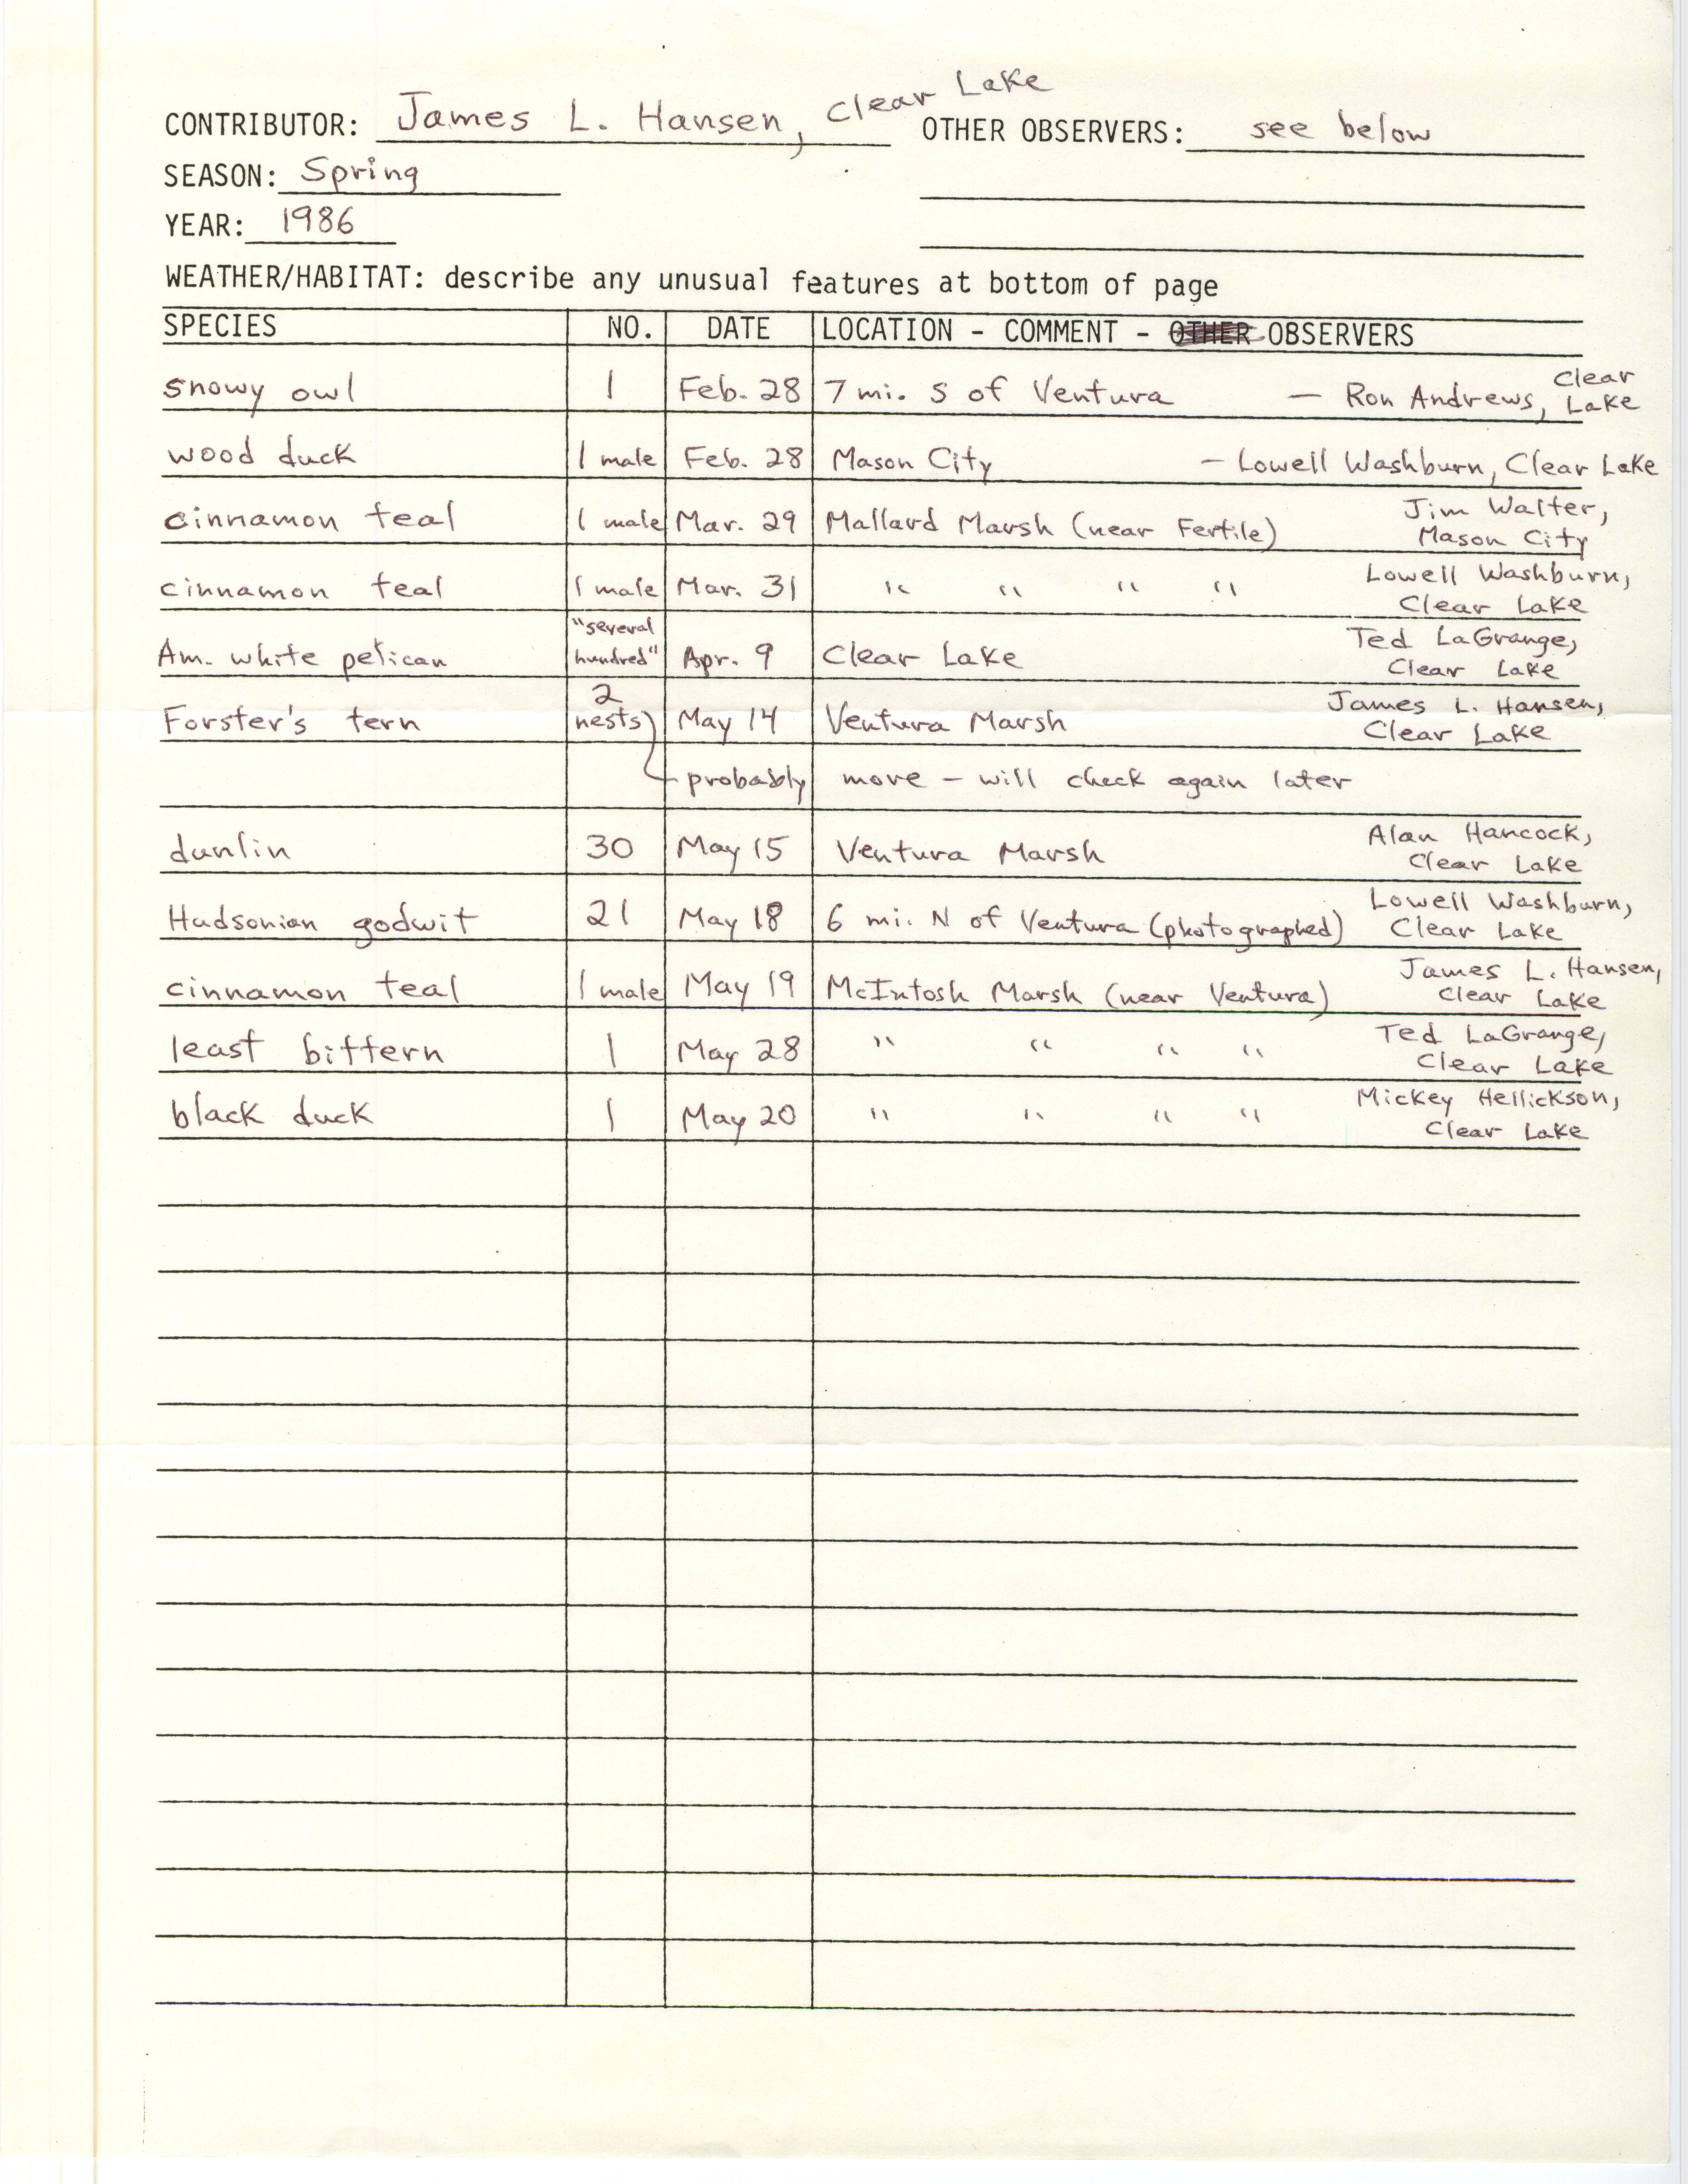 Field notes contributed by James L. Hansen, spring 1986